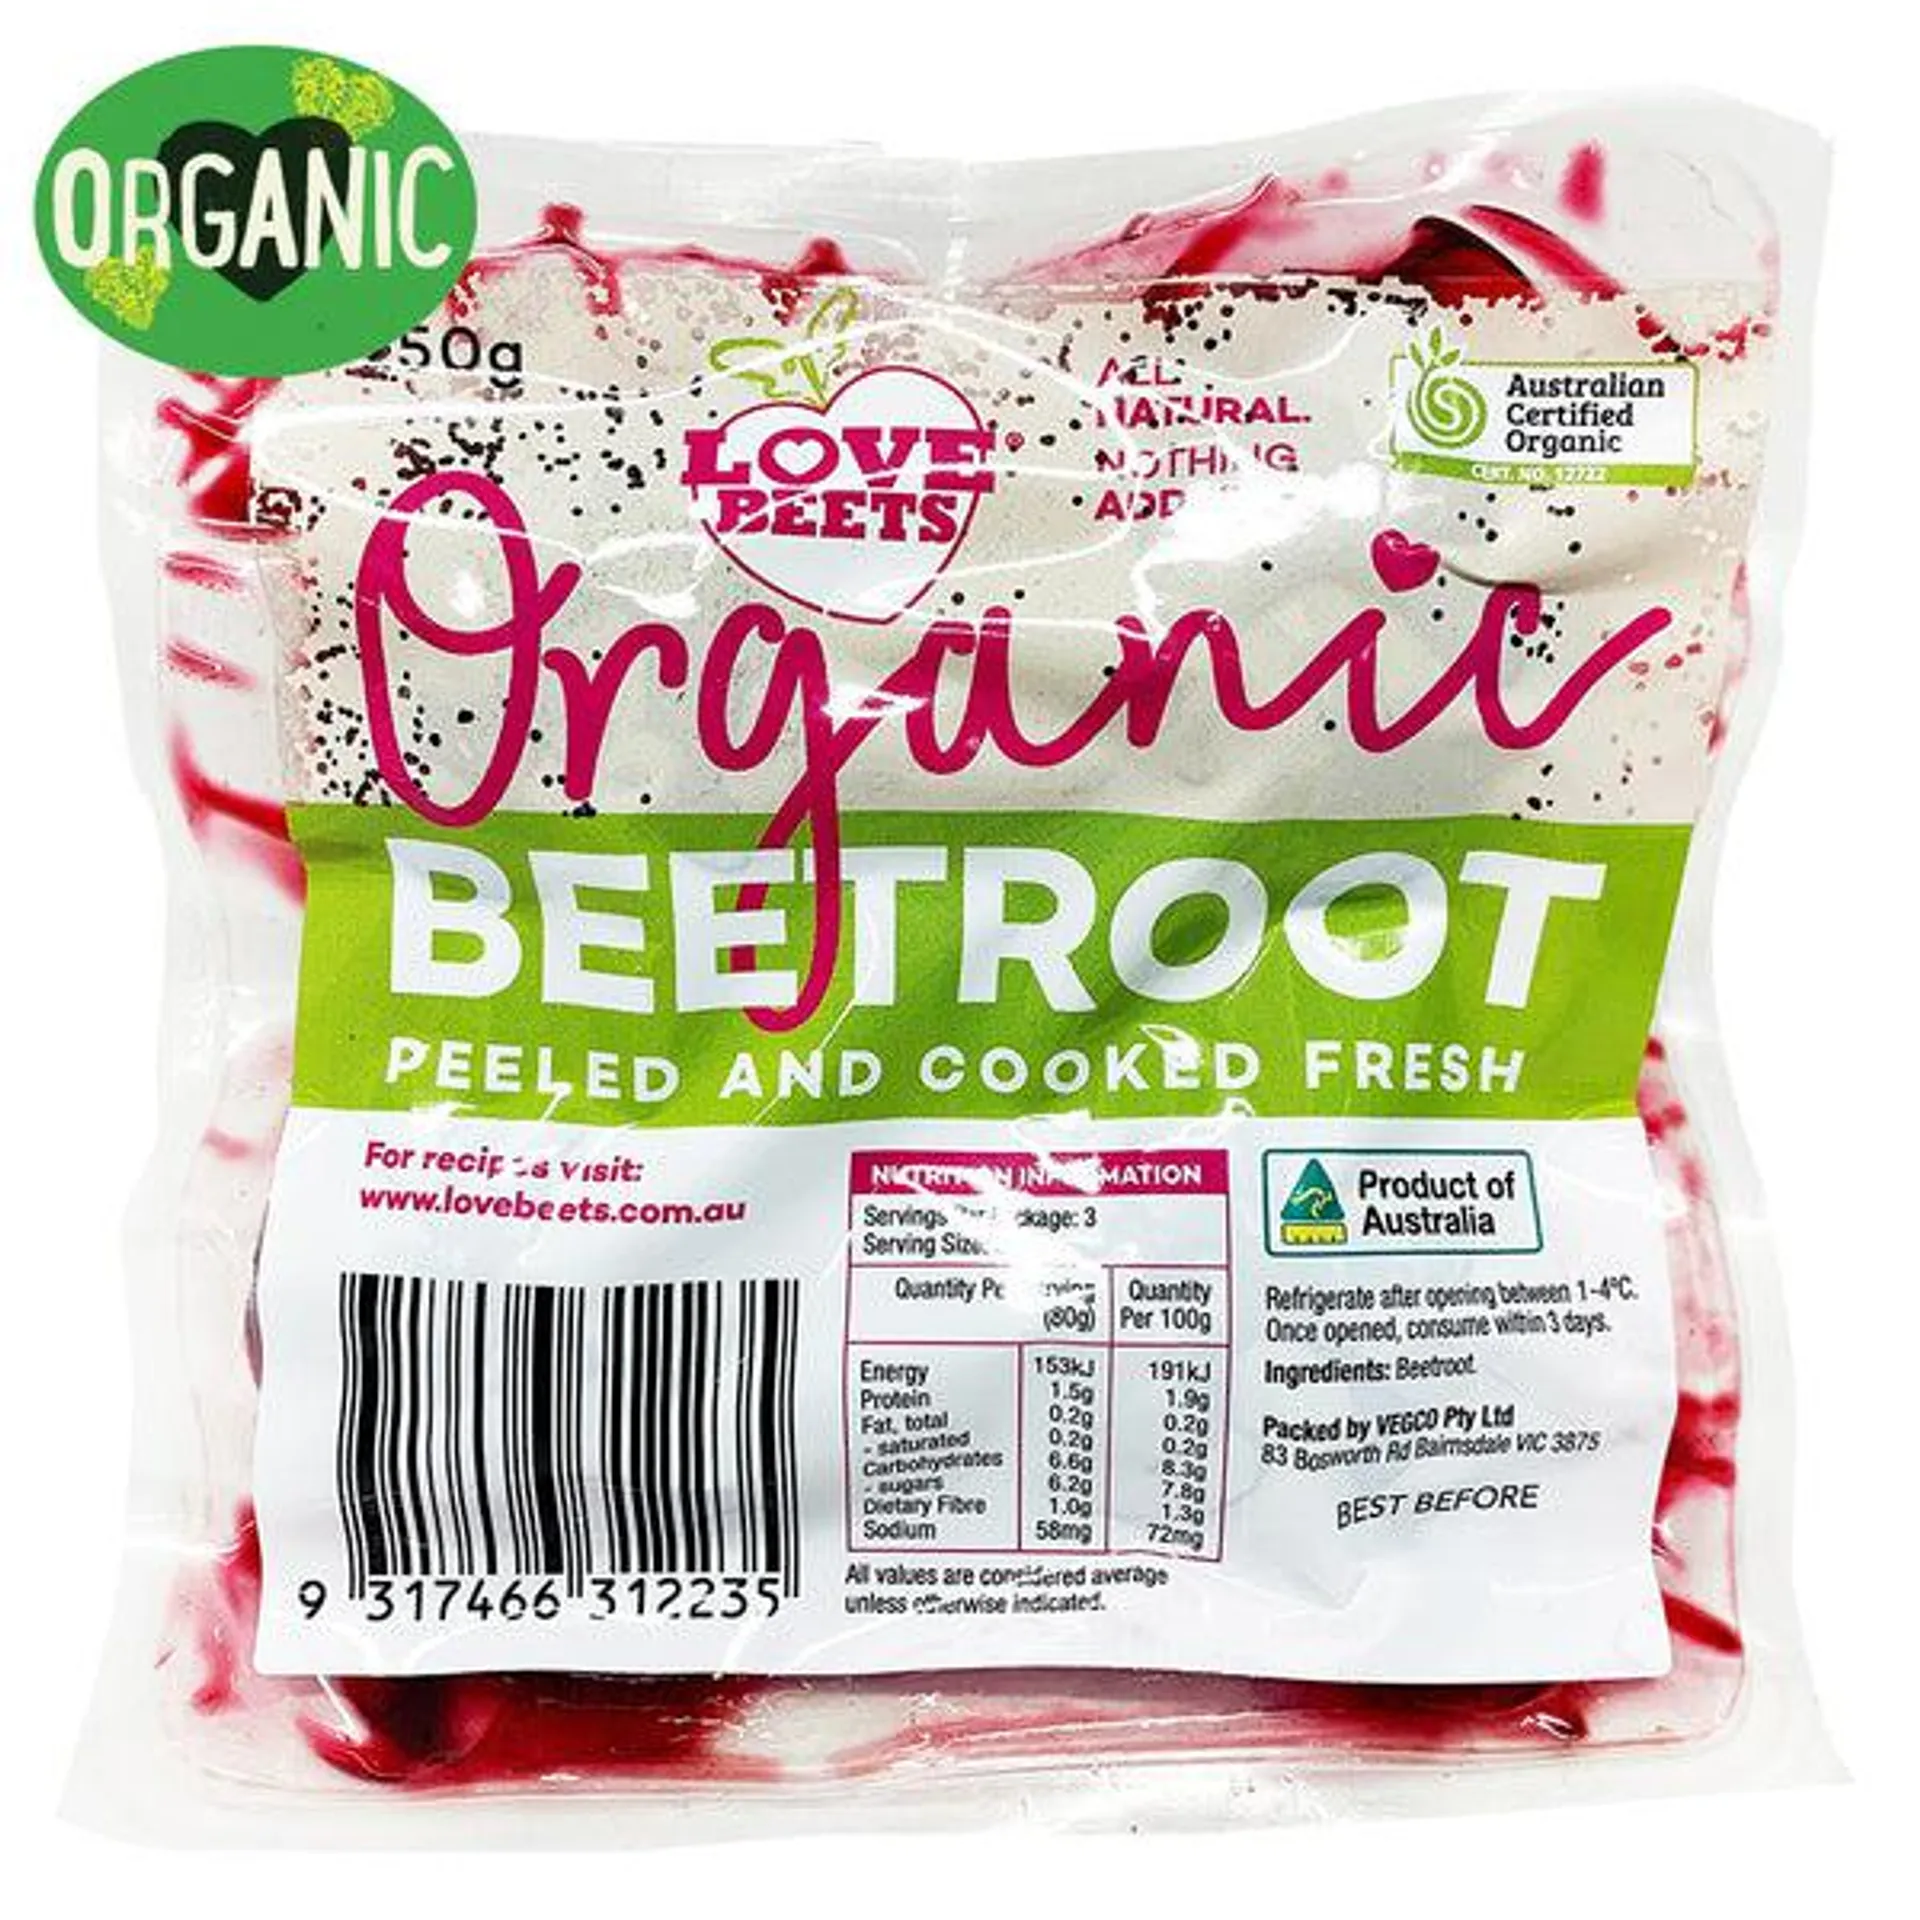 Beetroot Love Beets Organic Peel and Cooked 250g